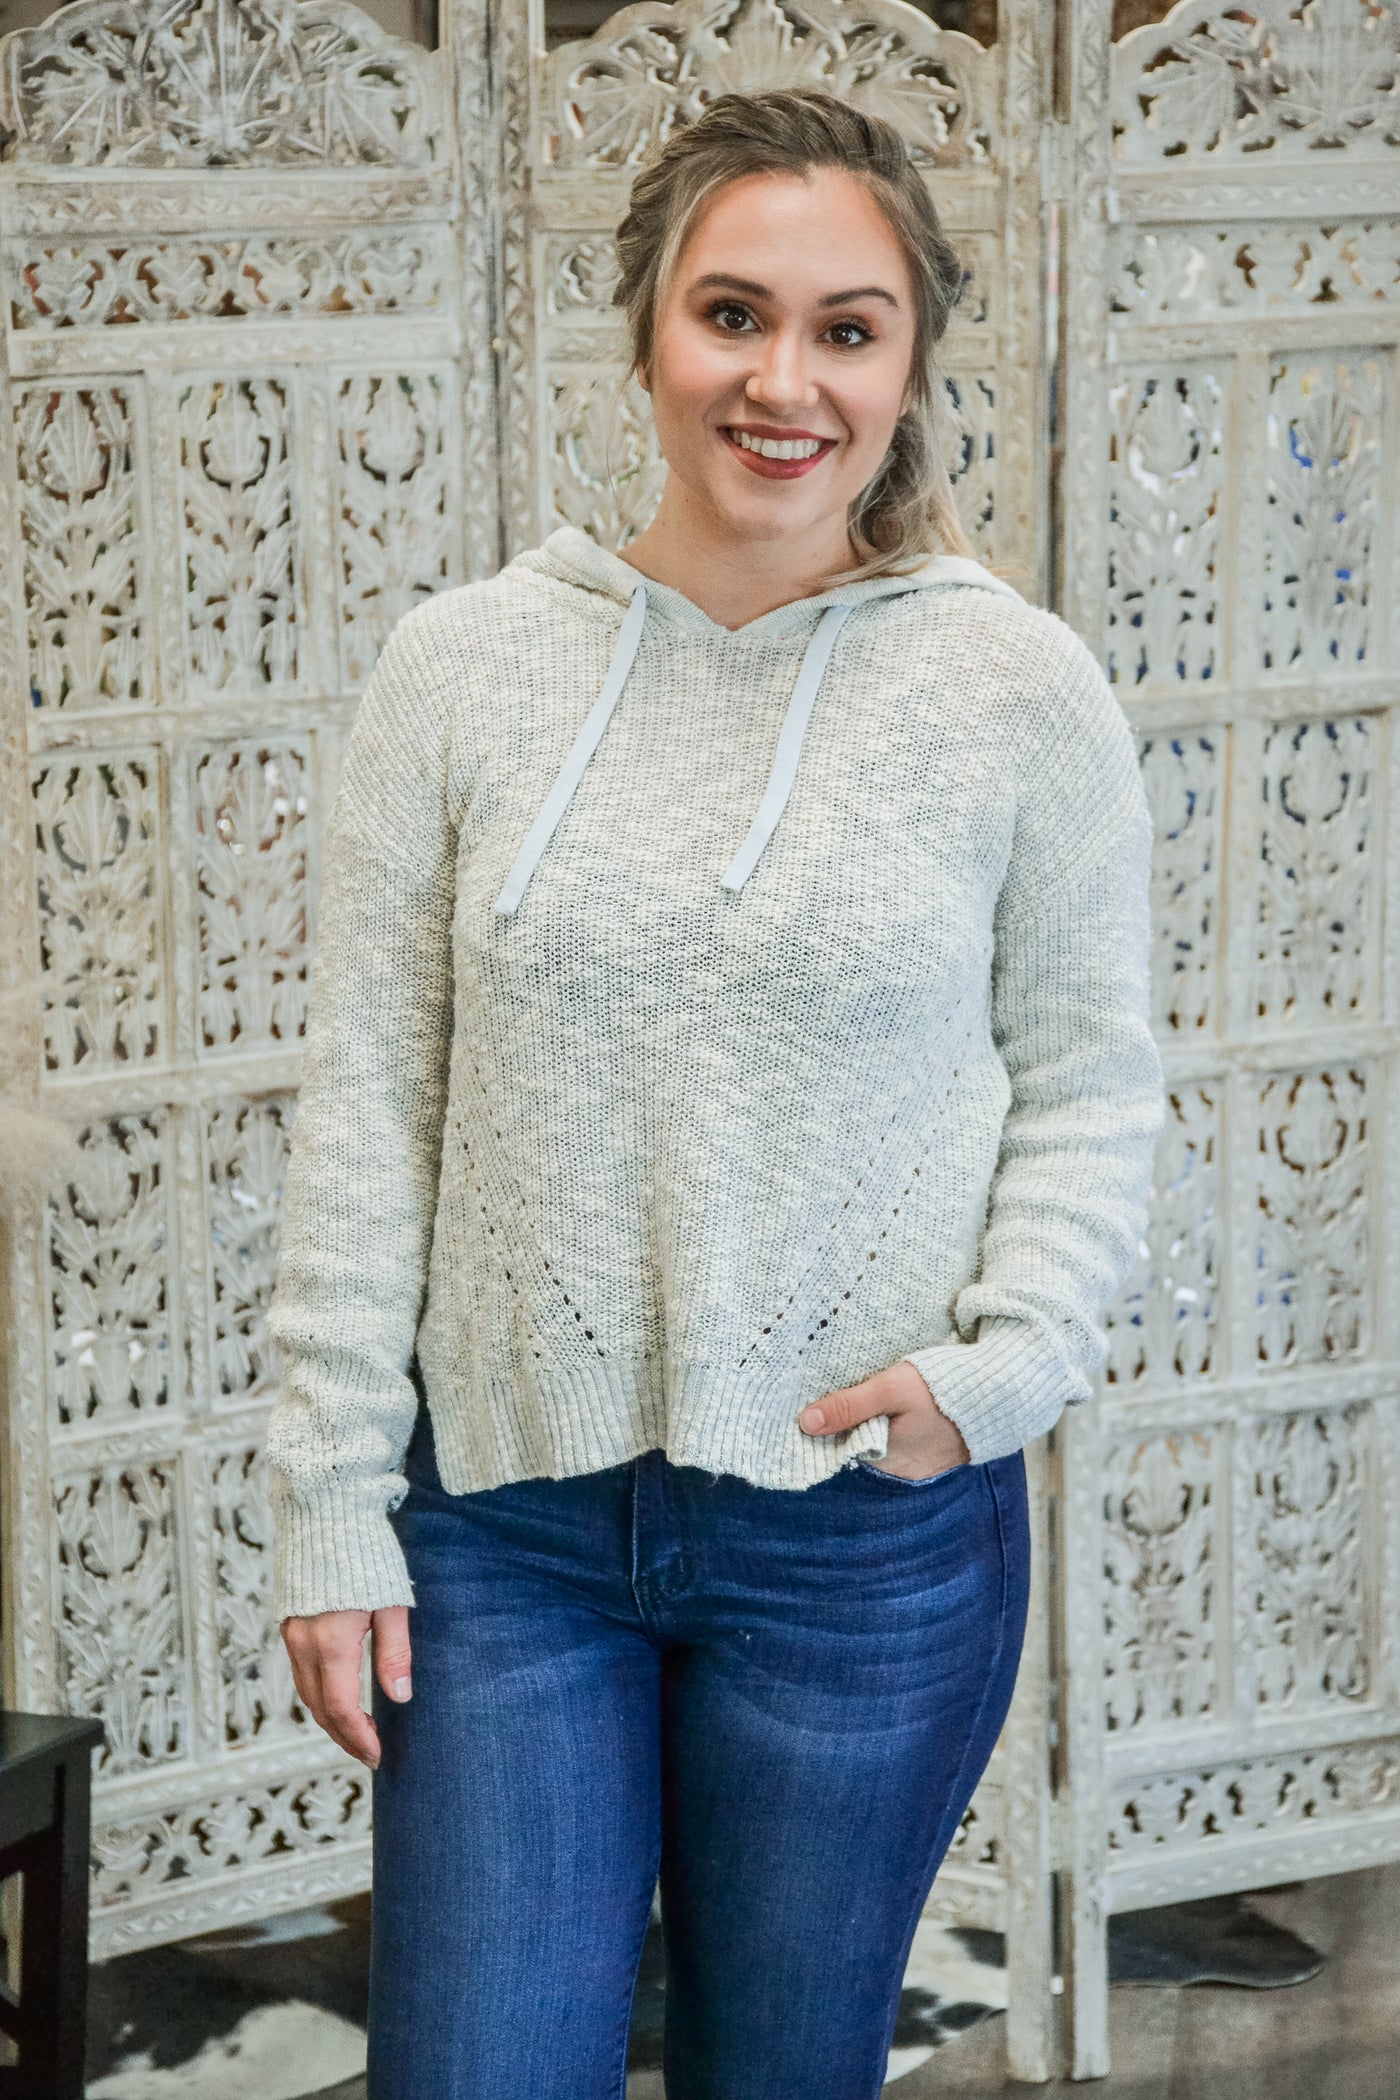 Light Blue pullover - Adorn Boutique in Mitchell